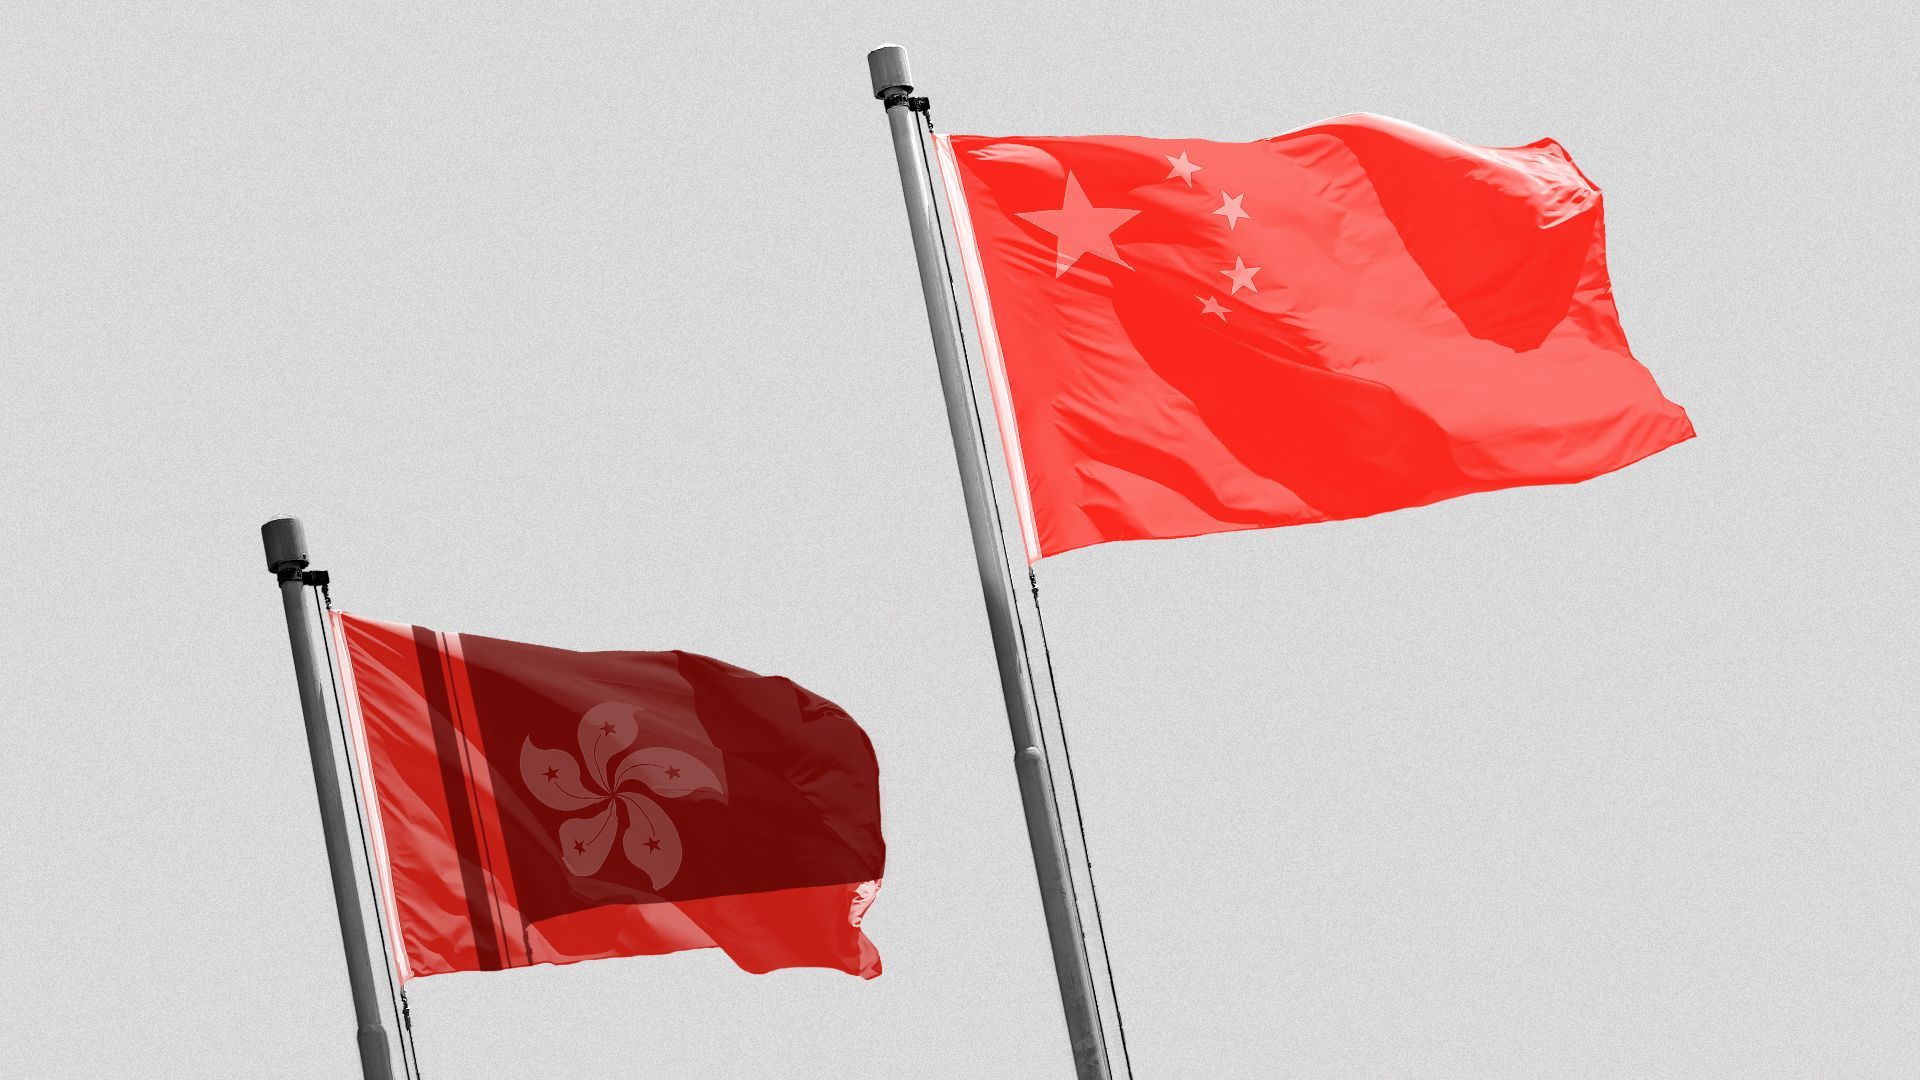 Illustration of the Chinese flag casting a shadow over the Hong Kong flag